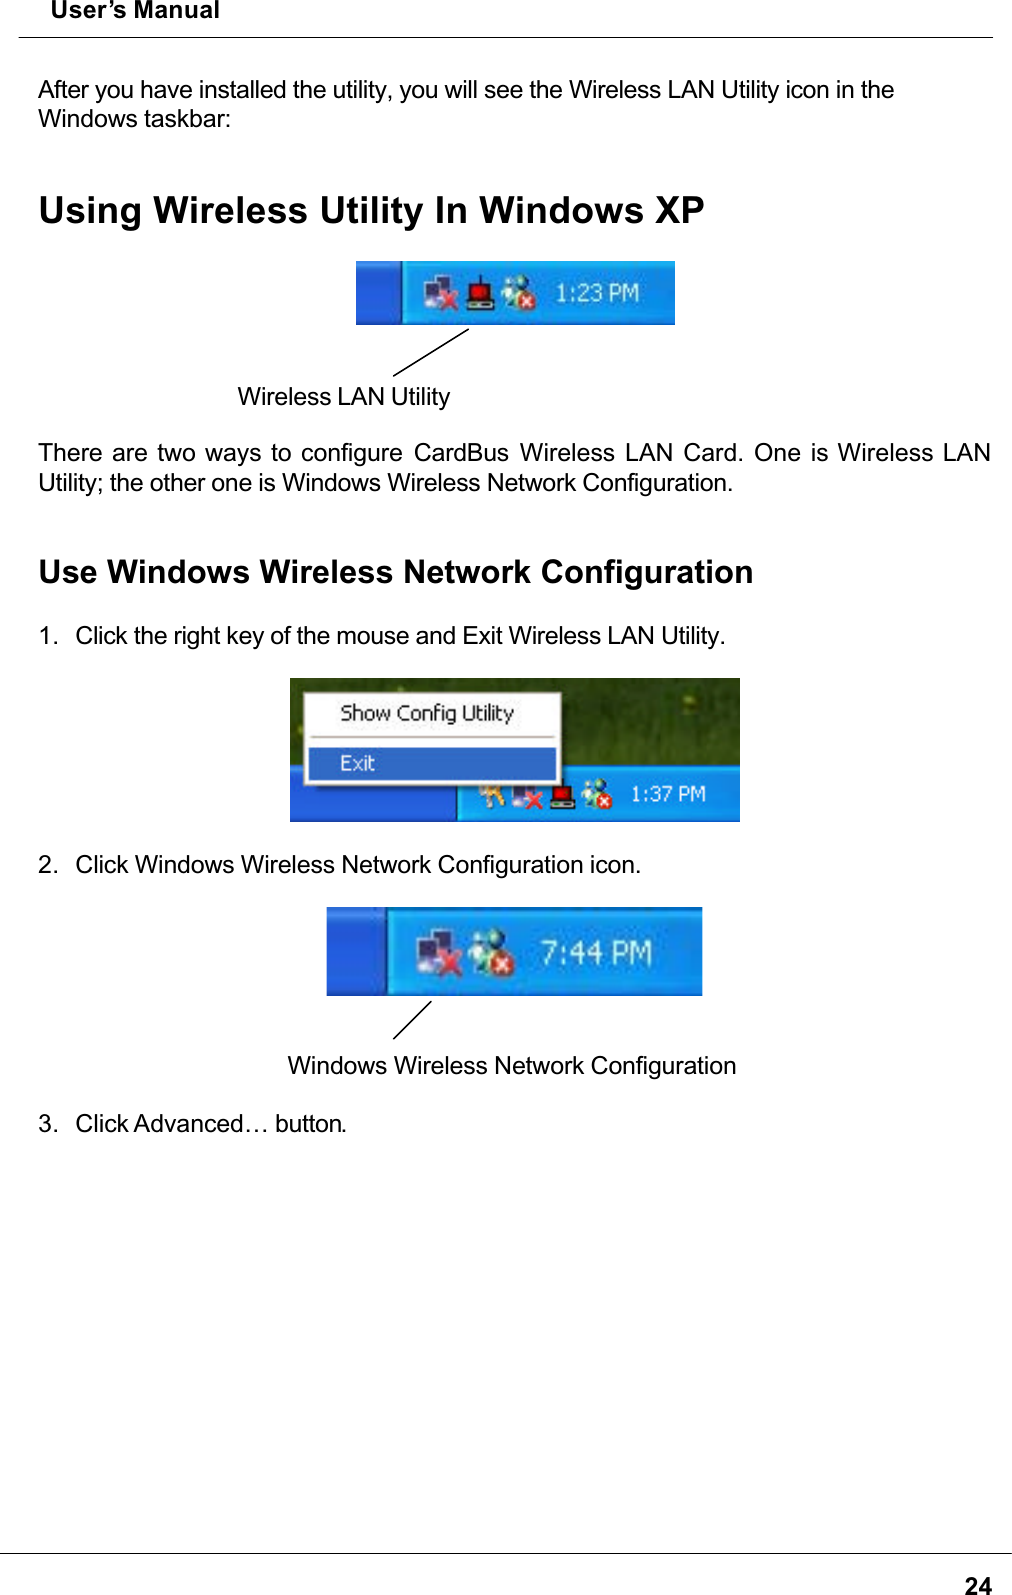  User’s Manual24After you have installed the utility, you will see the Wireless LAN Utility icon in the Windows taskbar:Using Wireless Utility In Windows XPWireless LAN Utility There are two ways to configure CardBus Wireless LAN Card. One is Wireless LAN Utility; the other one is Windows Wireless Network Configuration.Use Windows Wireless Network Configuration1. Click the right key of the mouse and Exit Wireless LAN Utility.2. Click Windows Wireless Network Configuration icon.Windows Wireless Network Configuration3. Click Advanced… button.